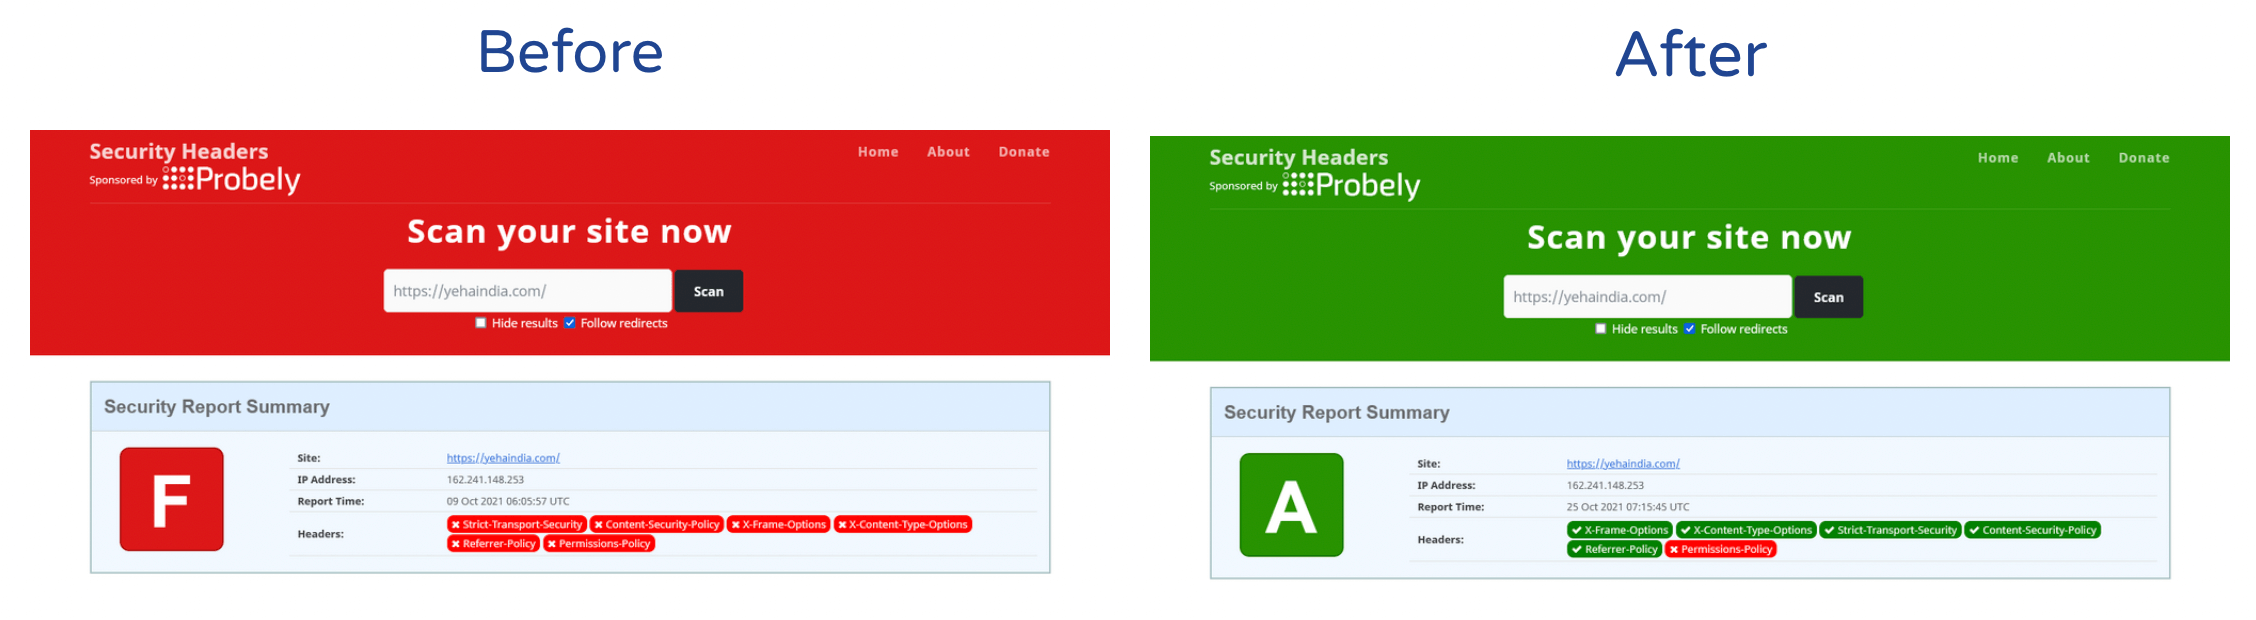 Security Rating Improved